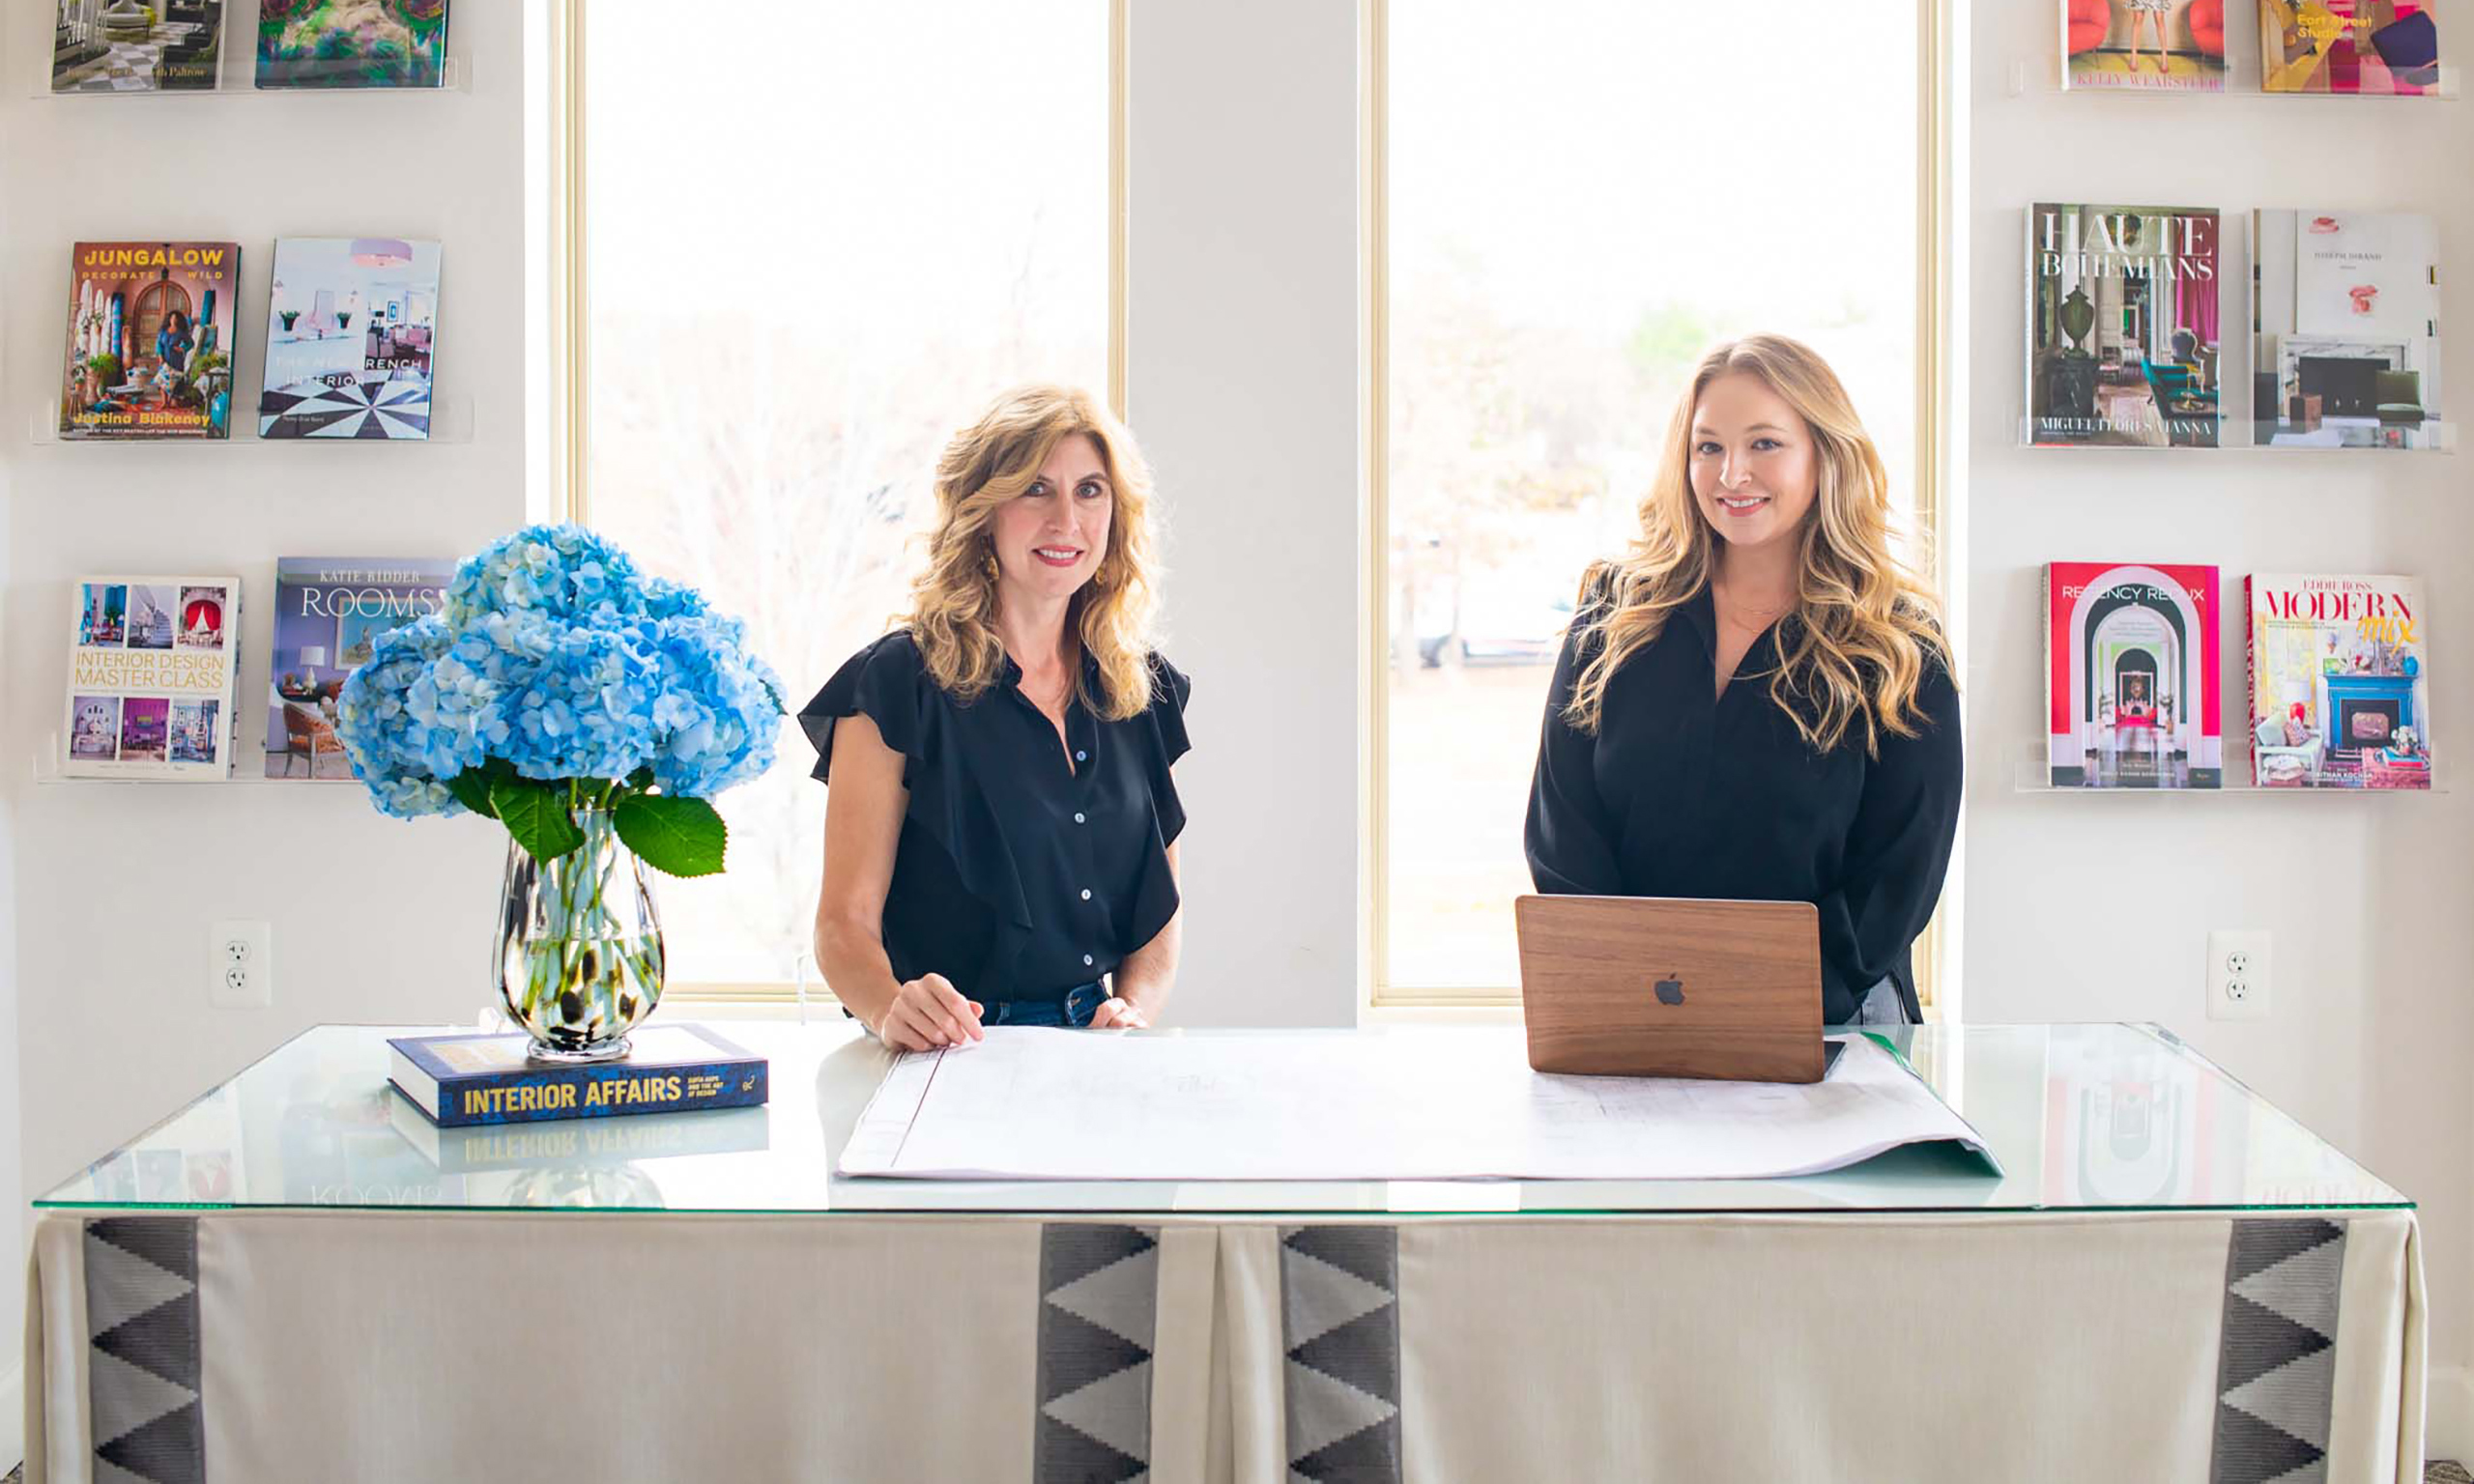 Erika and Emilie from Erika Bonnell Interiors